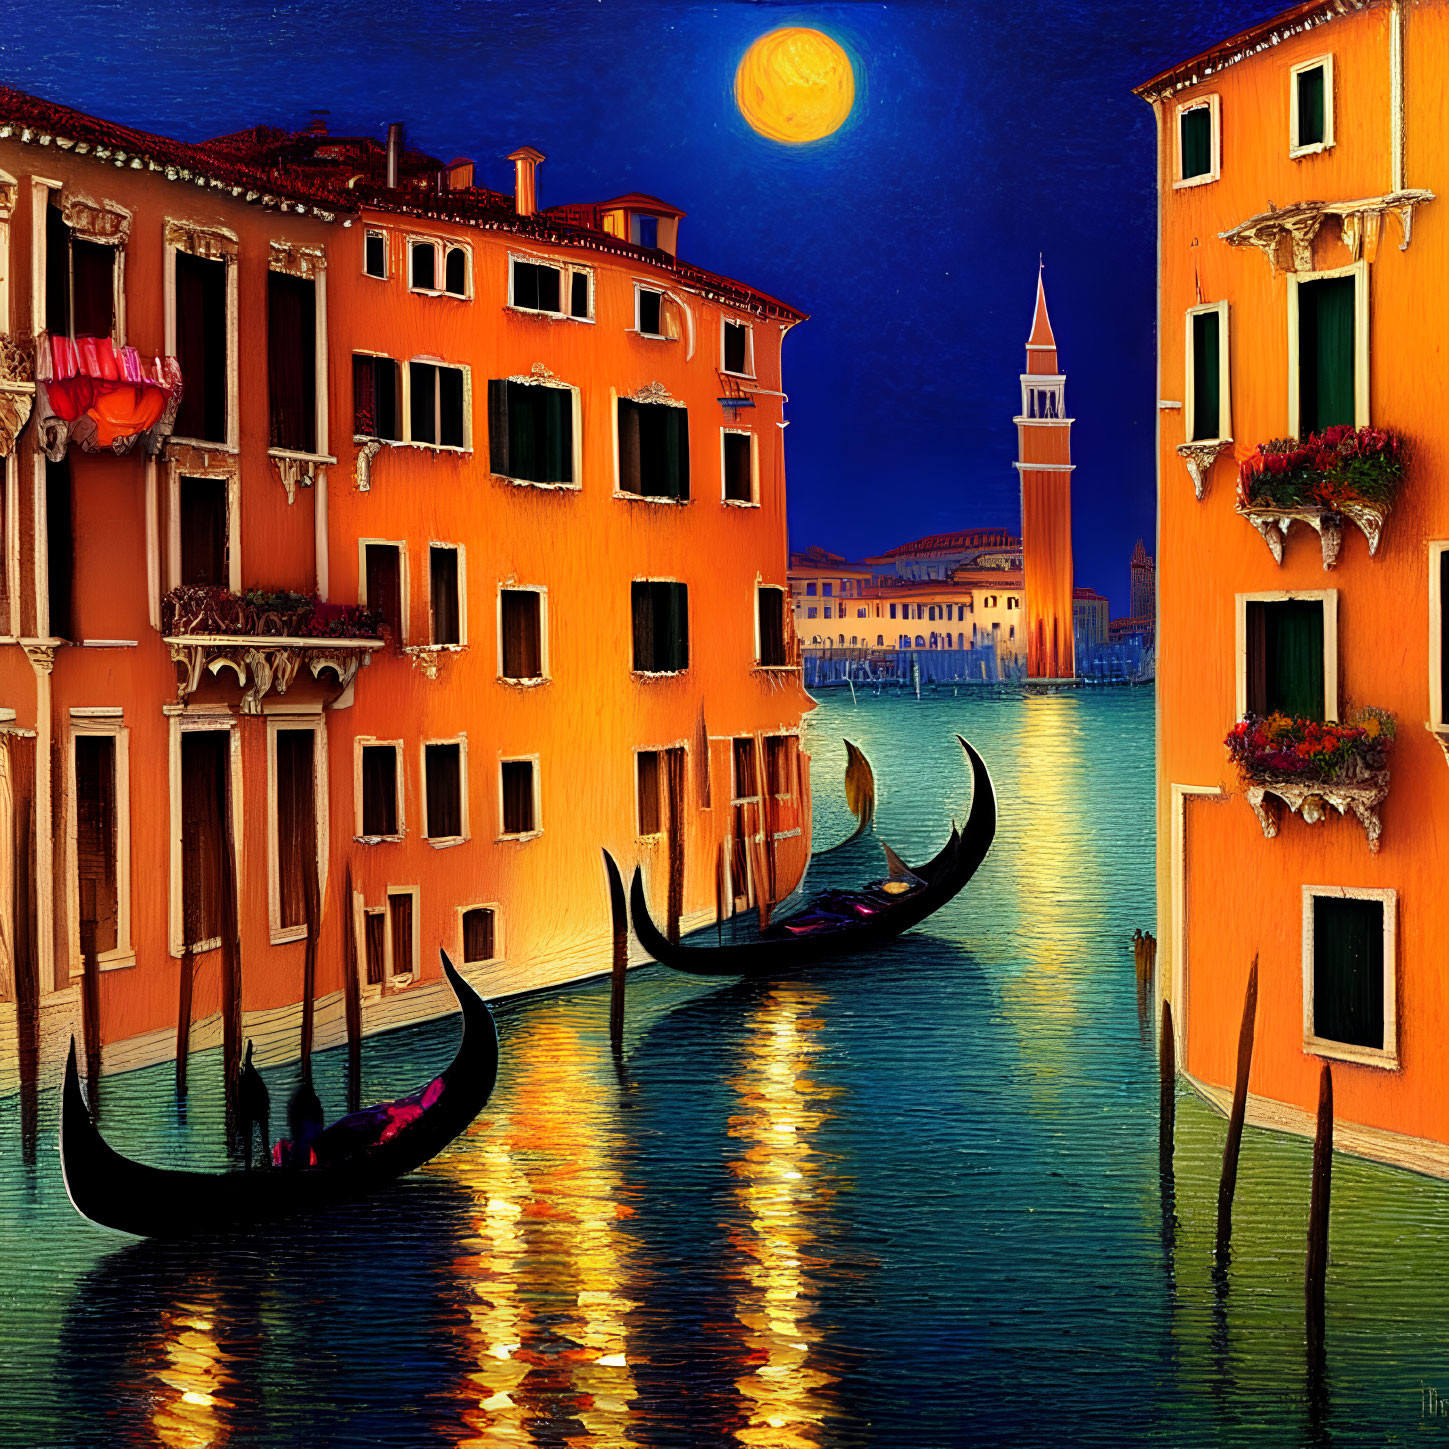 Nighttime painting of Venice with gondolas, orange buildings, and full moon reflection